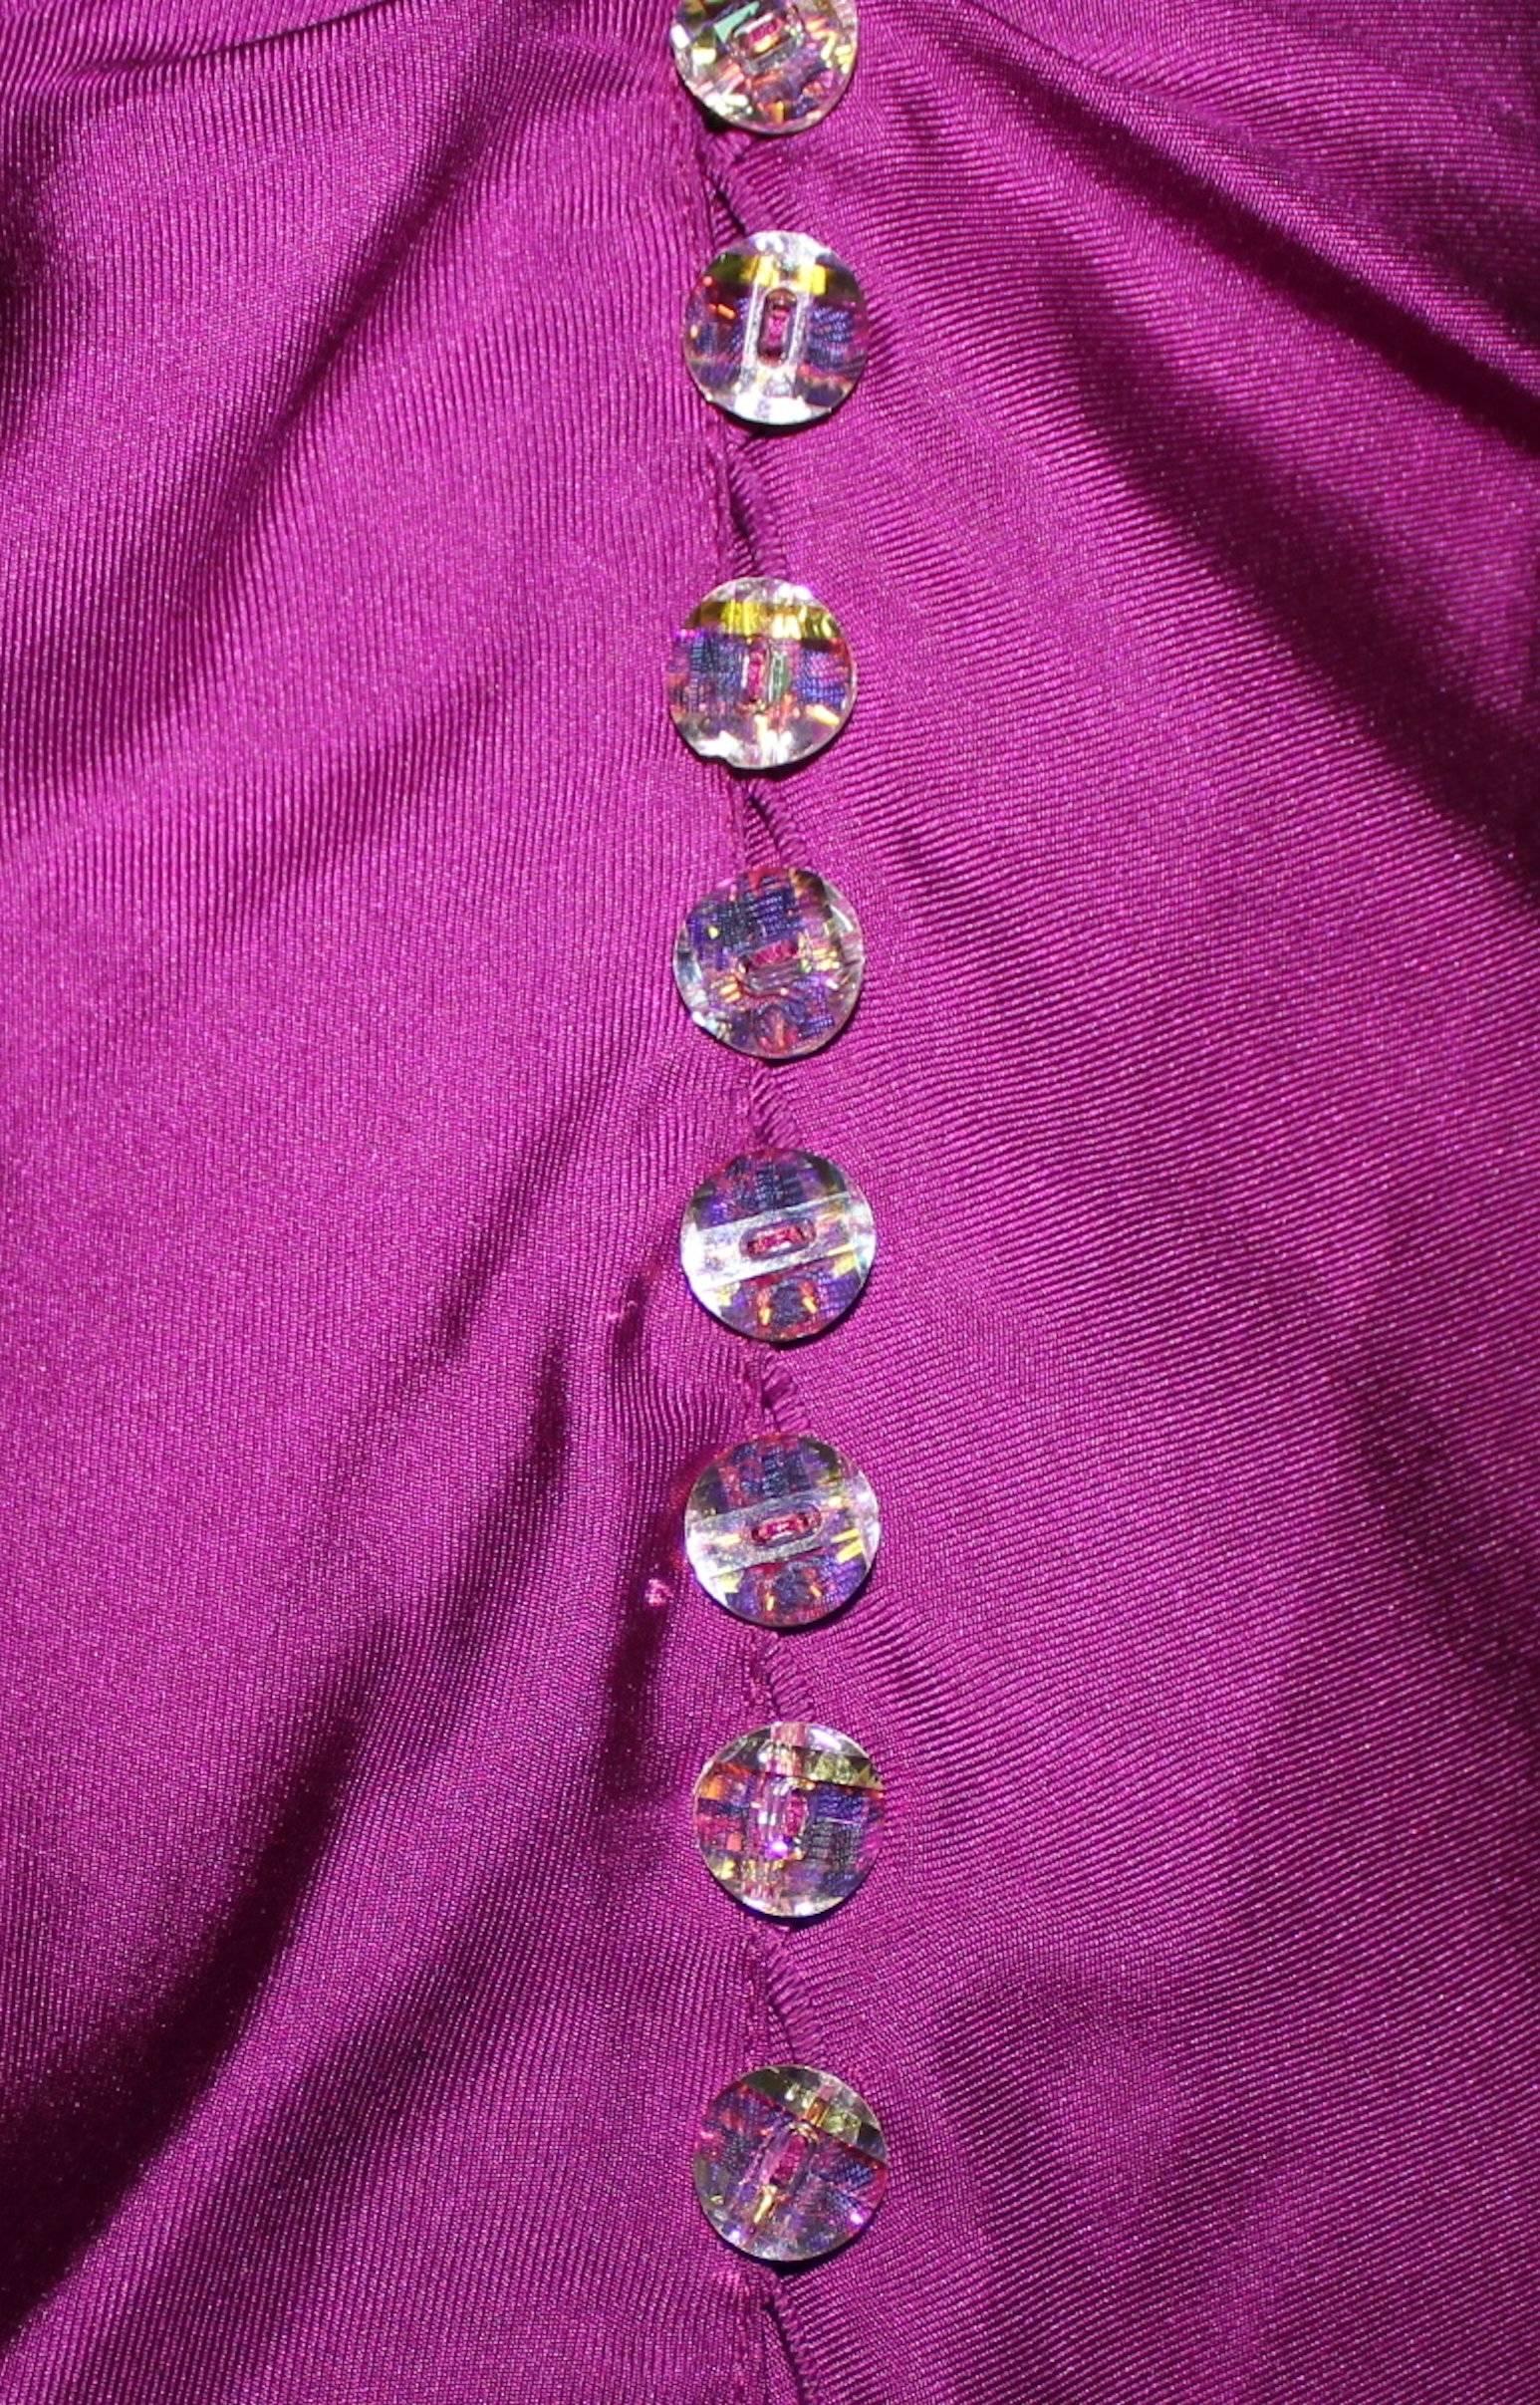 Gianni Versace SS 2000 Jungle Purple Hot Silk Blouse Top with Swarovski Buttons In Good Condition For Sale In Switzerland, CH